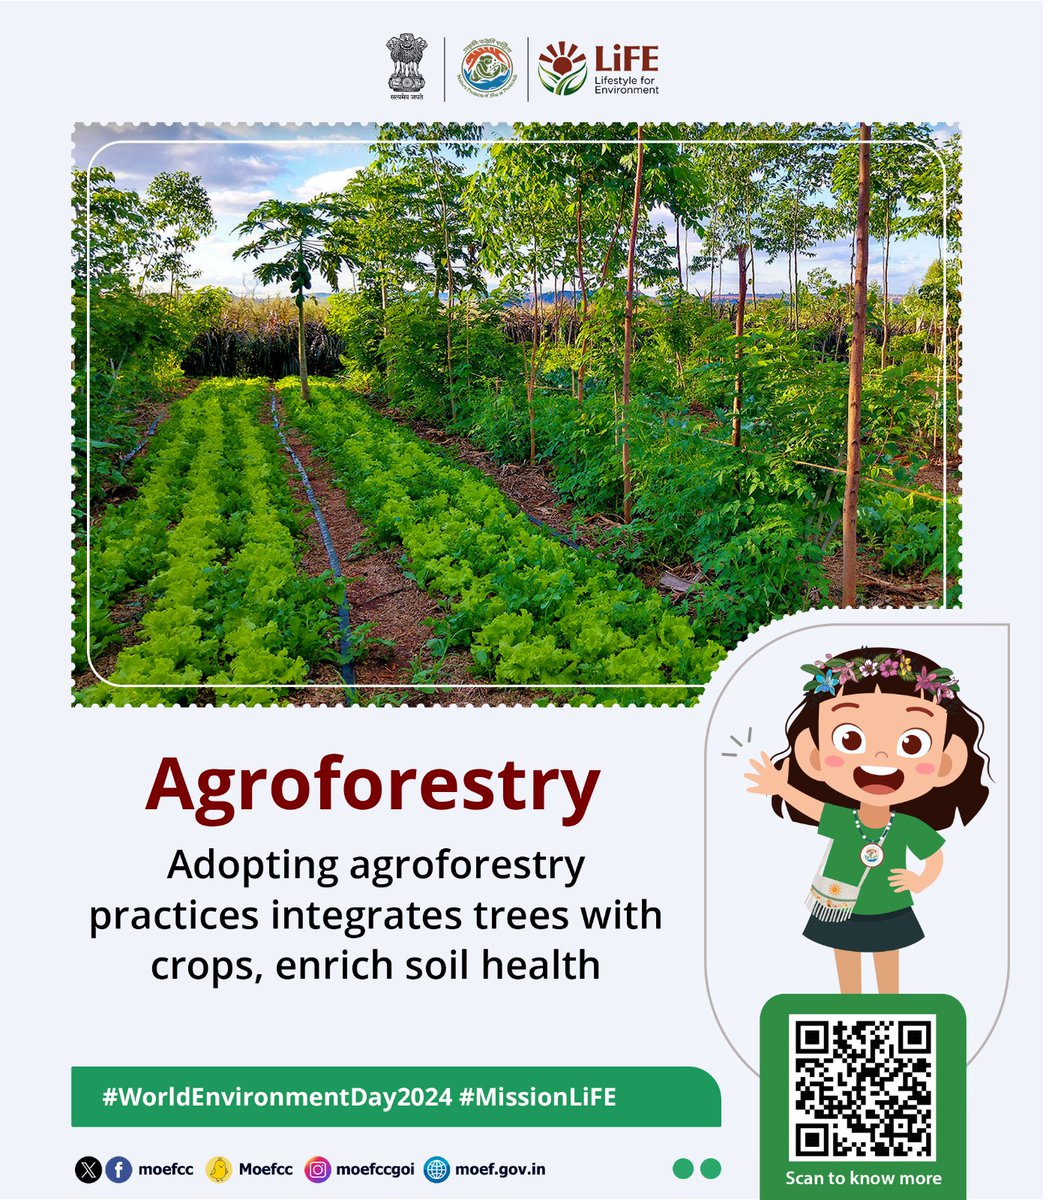 Know the potential of agroforestry: sustainable farming that combines trees and crops. It boosts biodiversity, improves soil health, and mitigates climate change. Let's cultivate a greener and resilient future together. #MissionLife #WED2024 @SCRailwayIndia